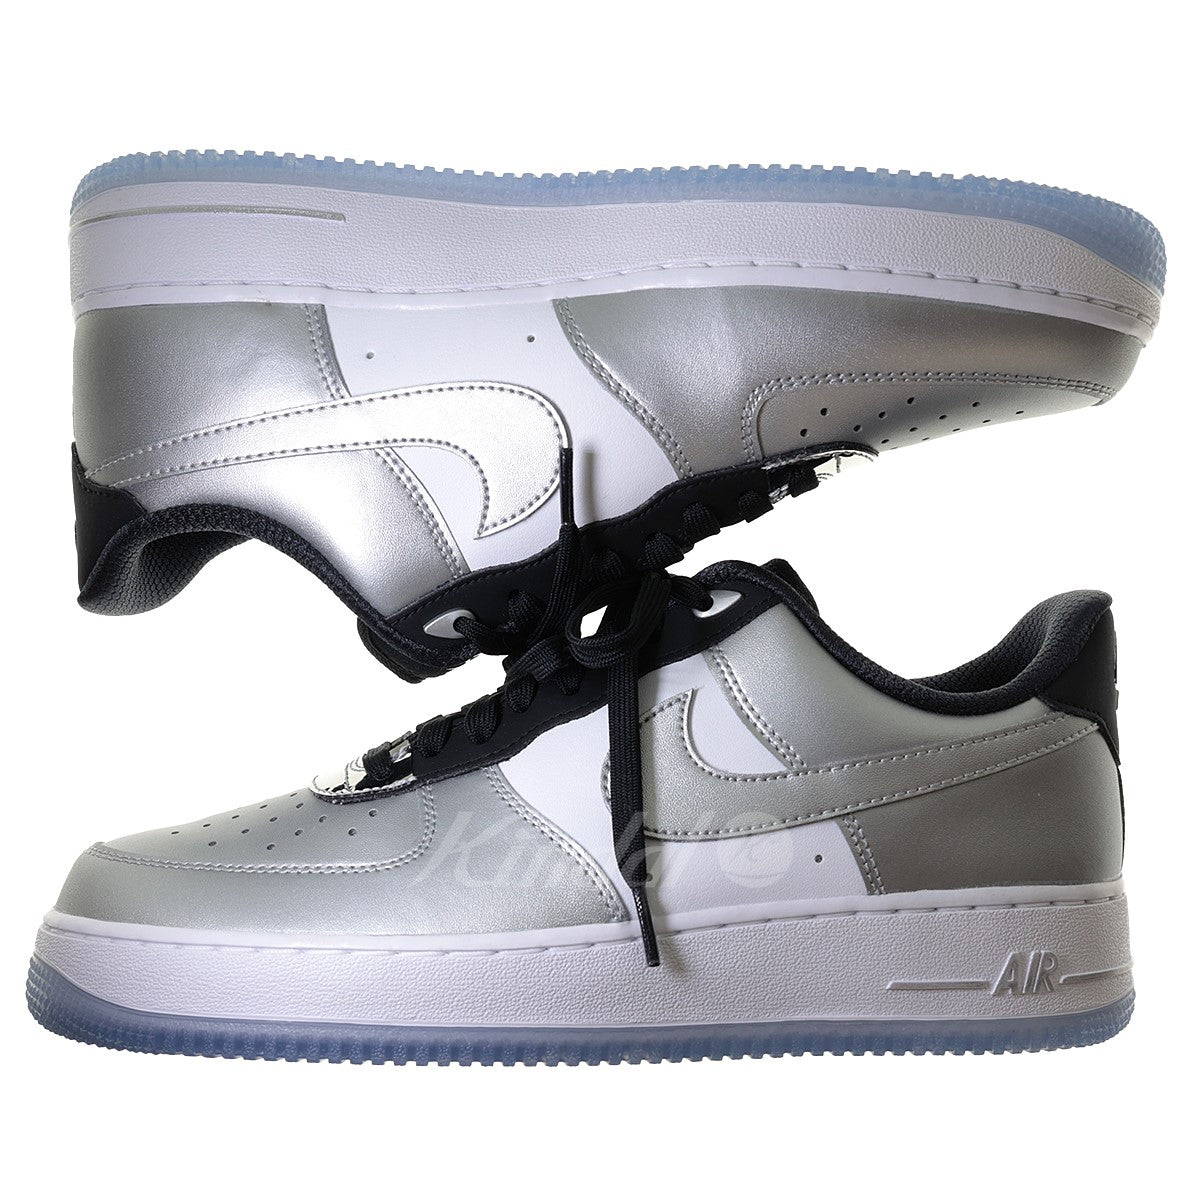 NIKE(ナイキ) エアフォース1ロー WMNS Air Force 1 Low Chrome DX6764 